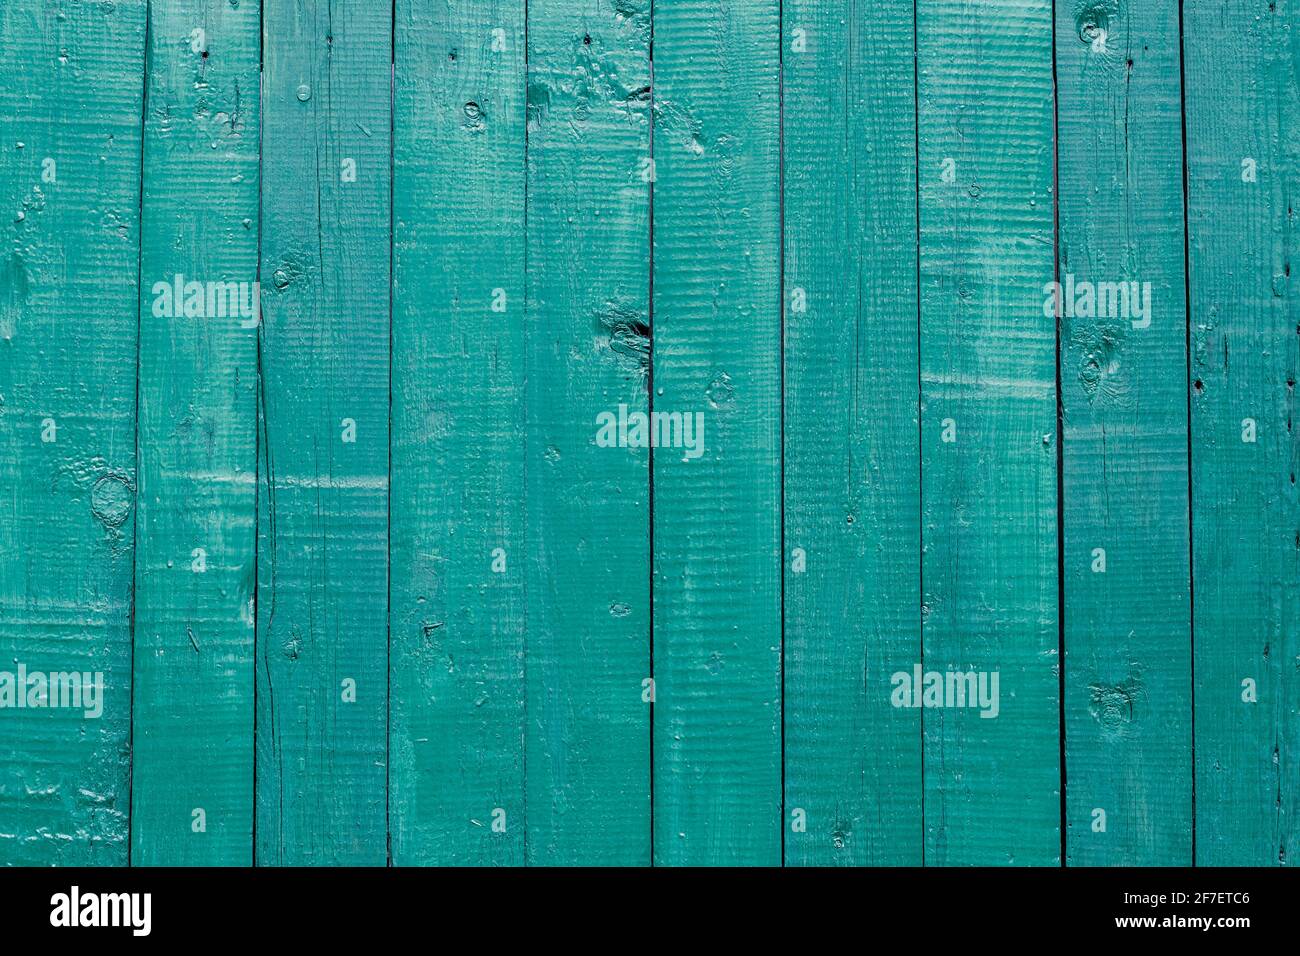 Old wooden turquoise fence, plank pattern, wood floor texture, vintage door, painted timber wall, striped surface, green stained furniture, weathered Stock Photo